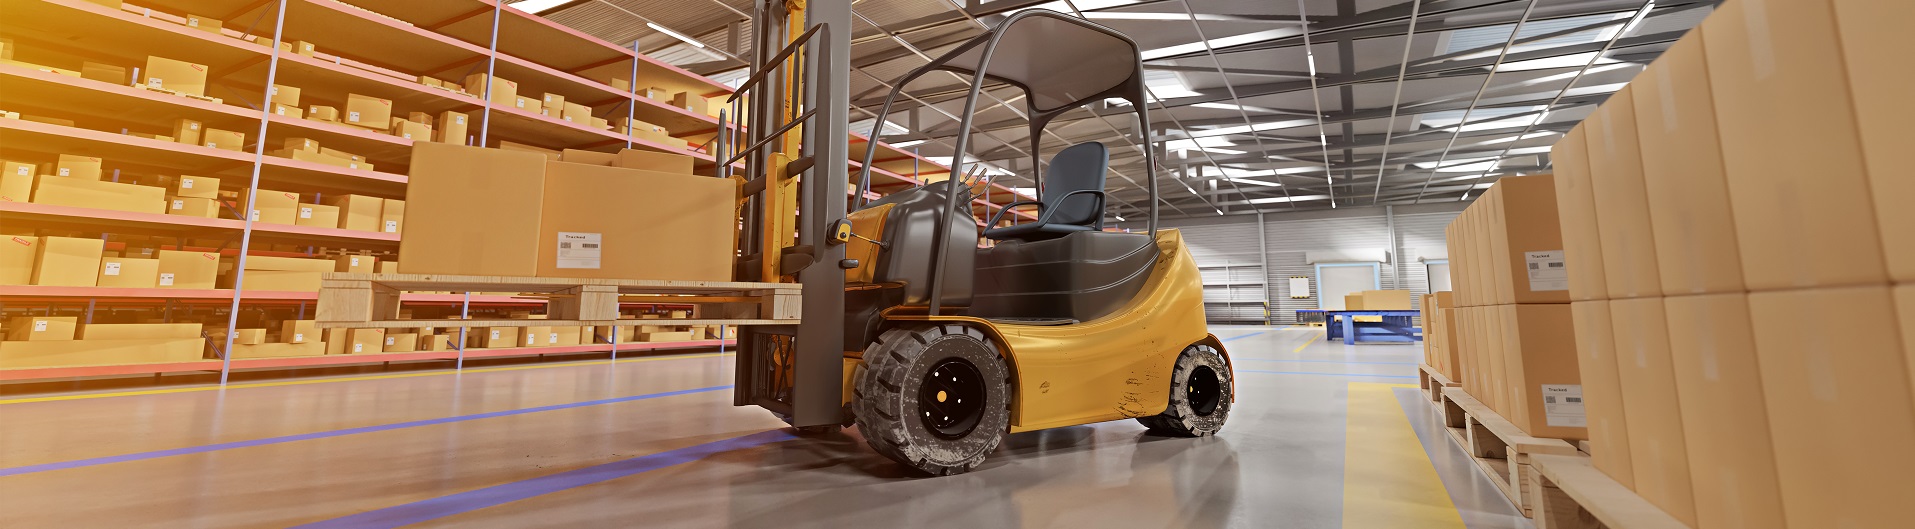 Forklift Training: Non-Operator Safety